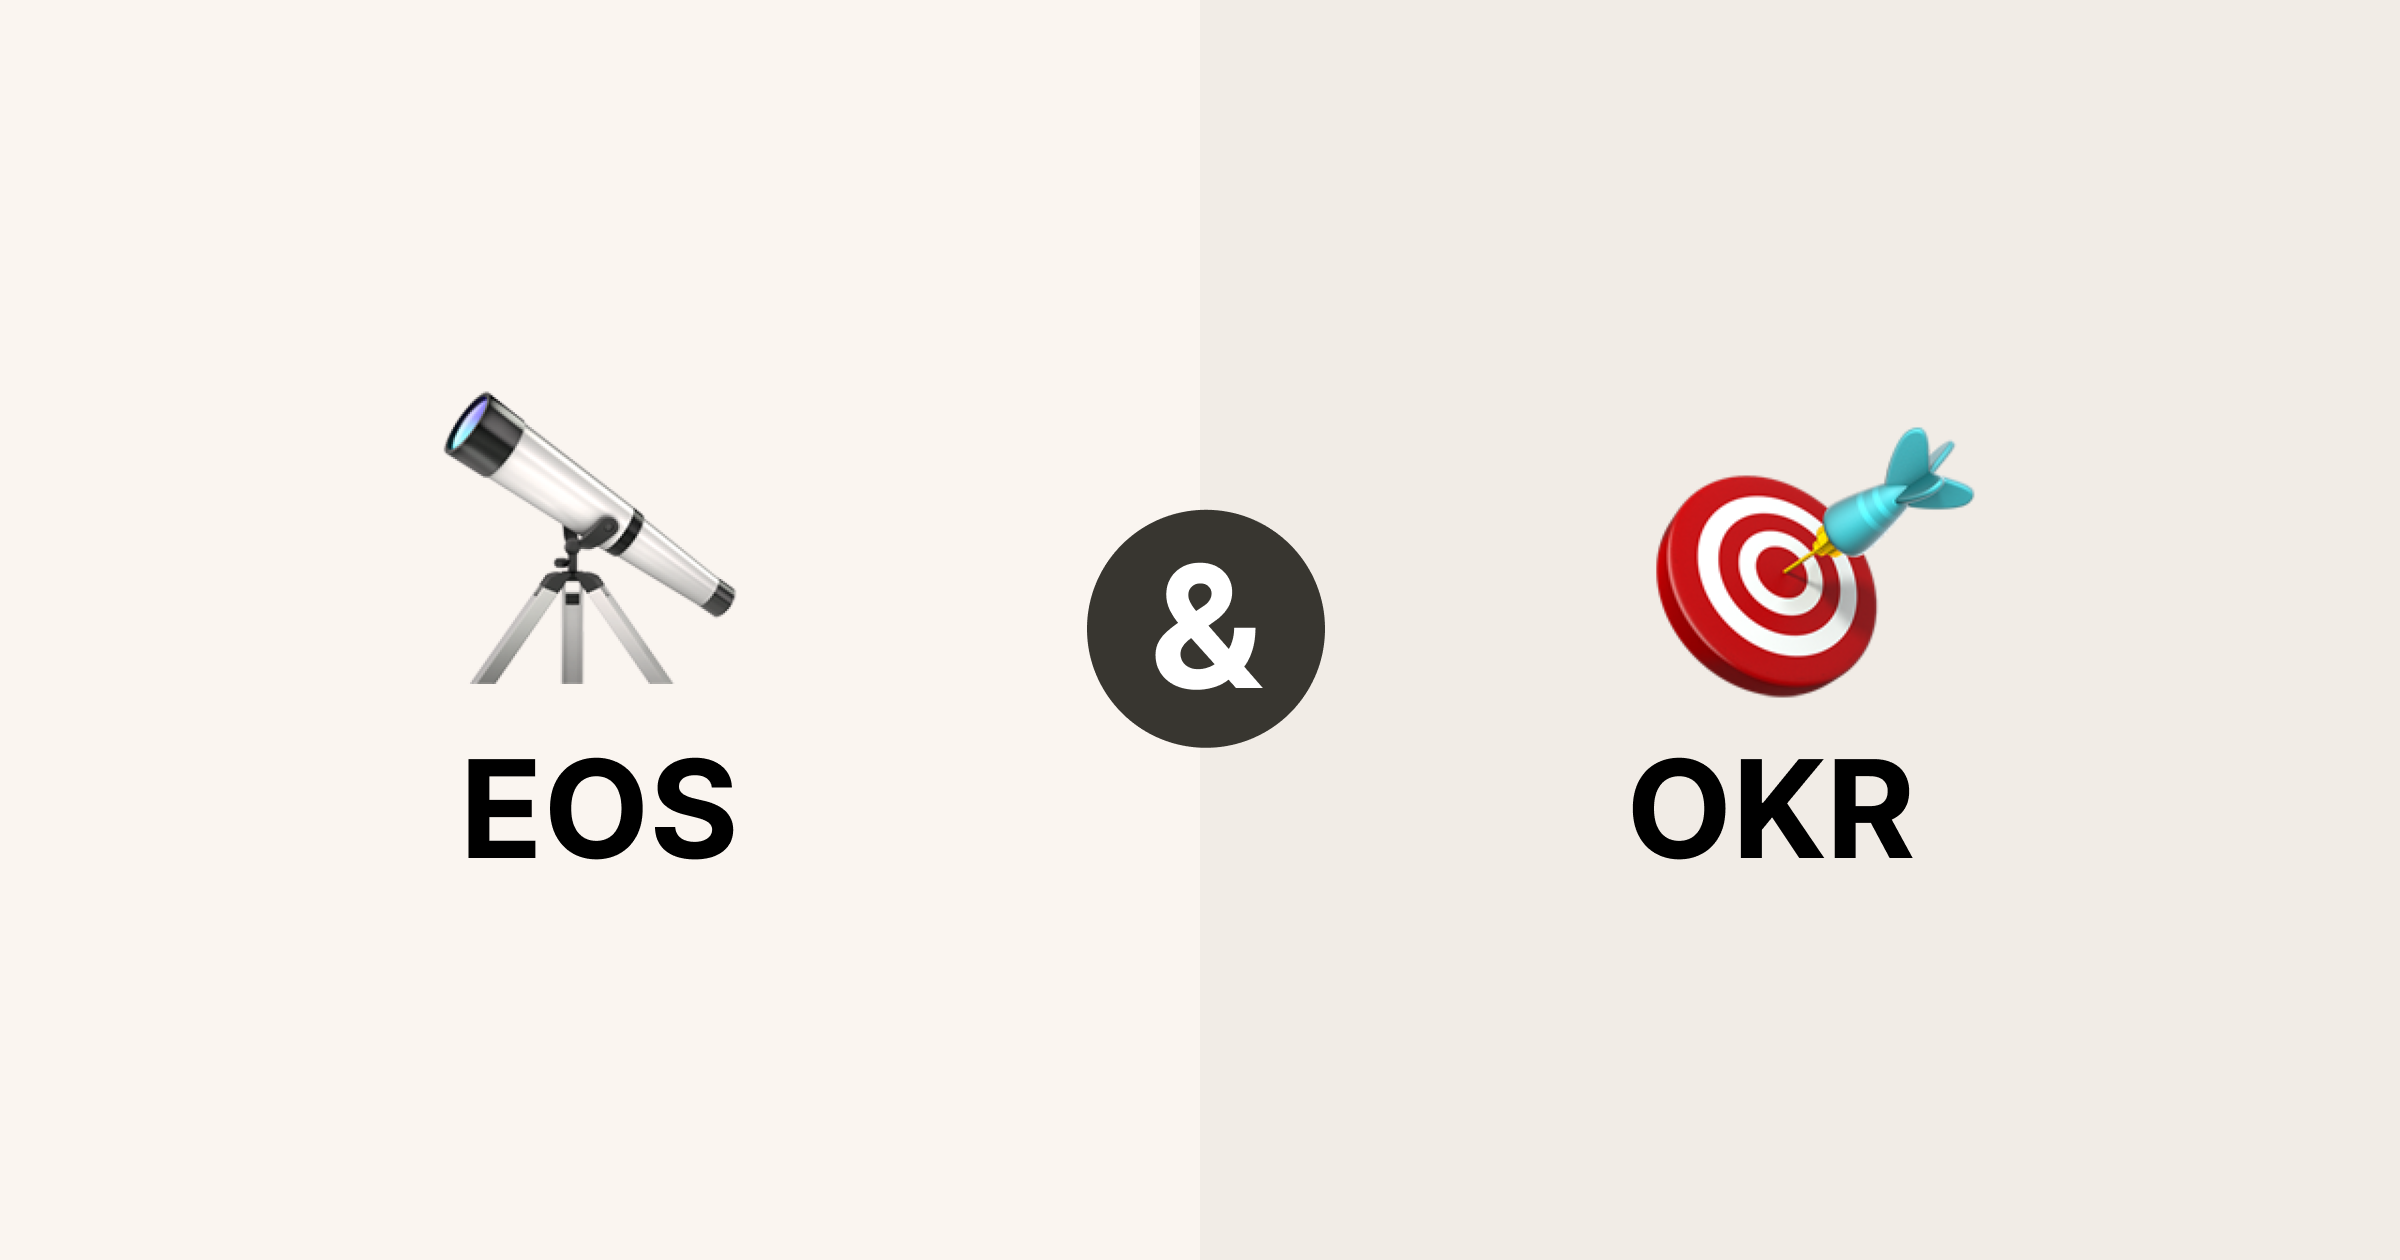 EOS and OKR